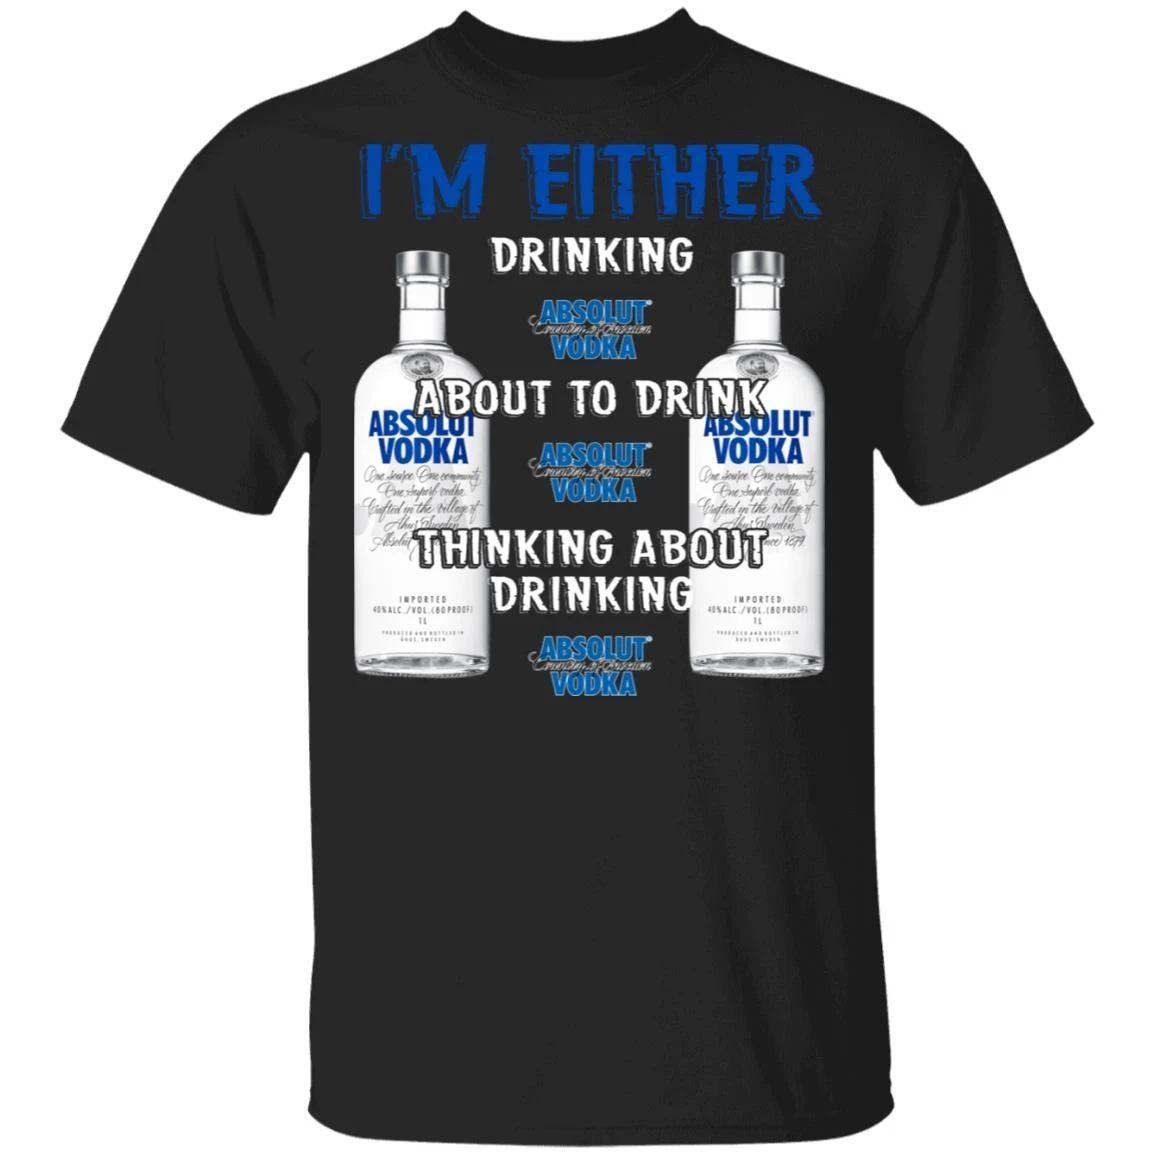 I'm Either Drinking Absolut T-shirt Vodka Addict Tee MT01-Bounce Tee